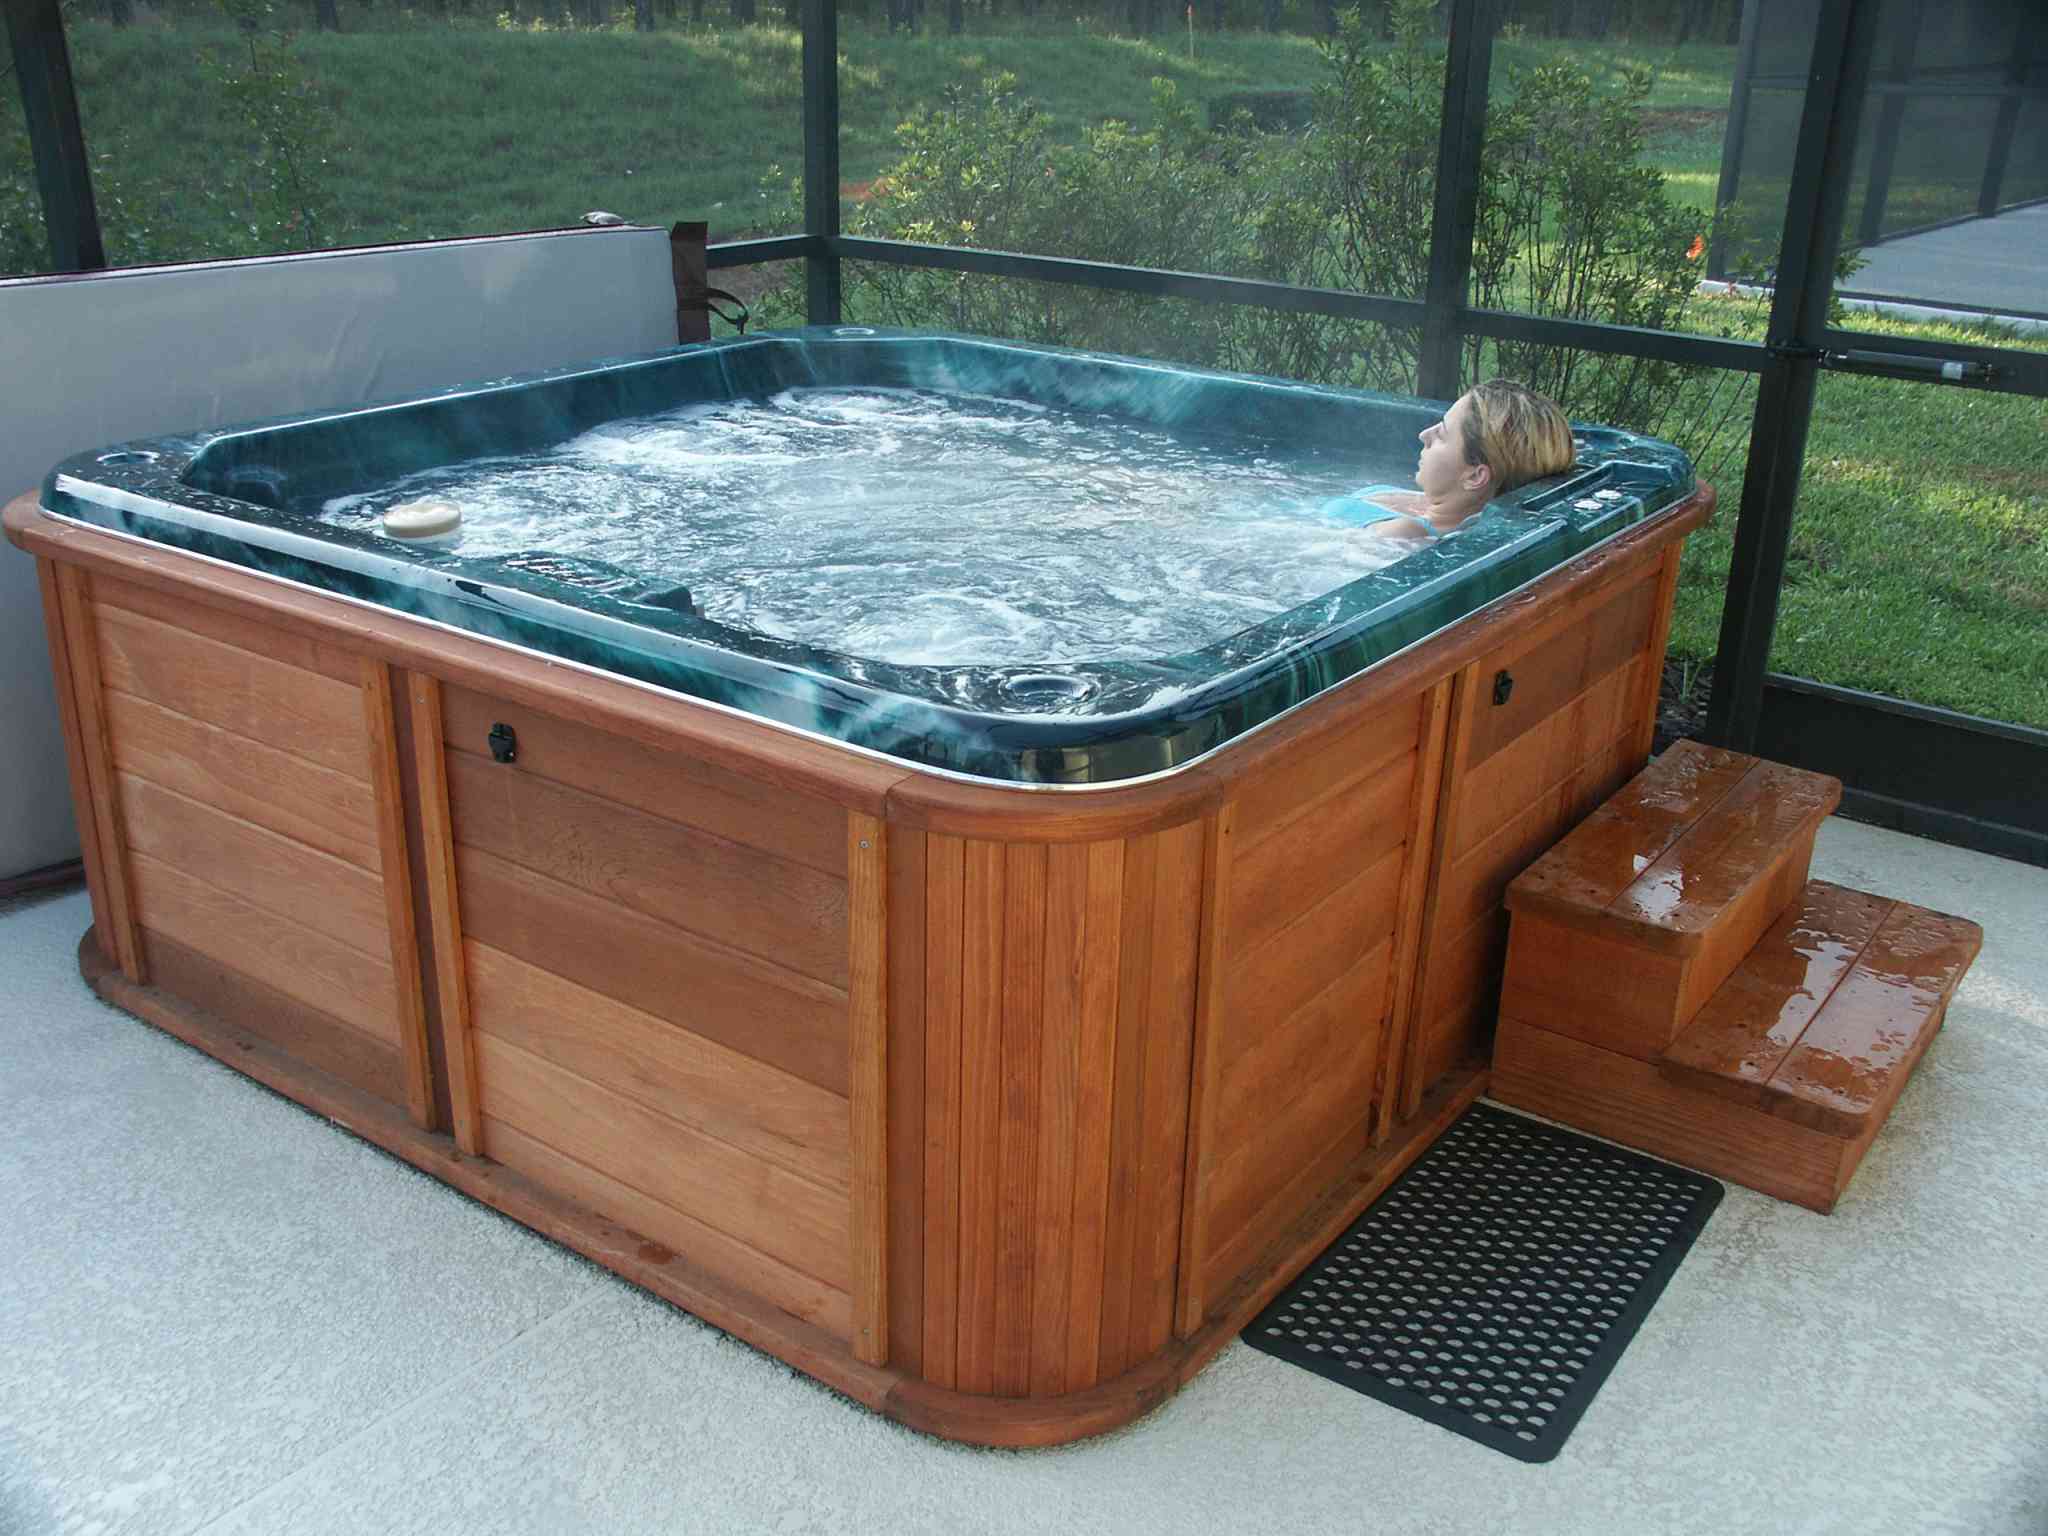 Tips For Hot Tub Owners